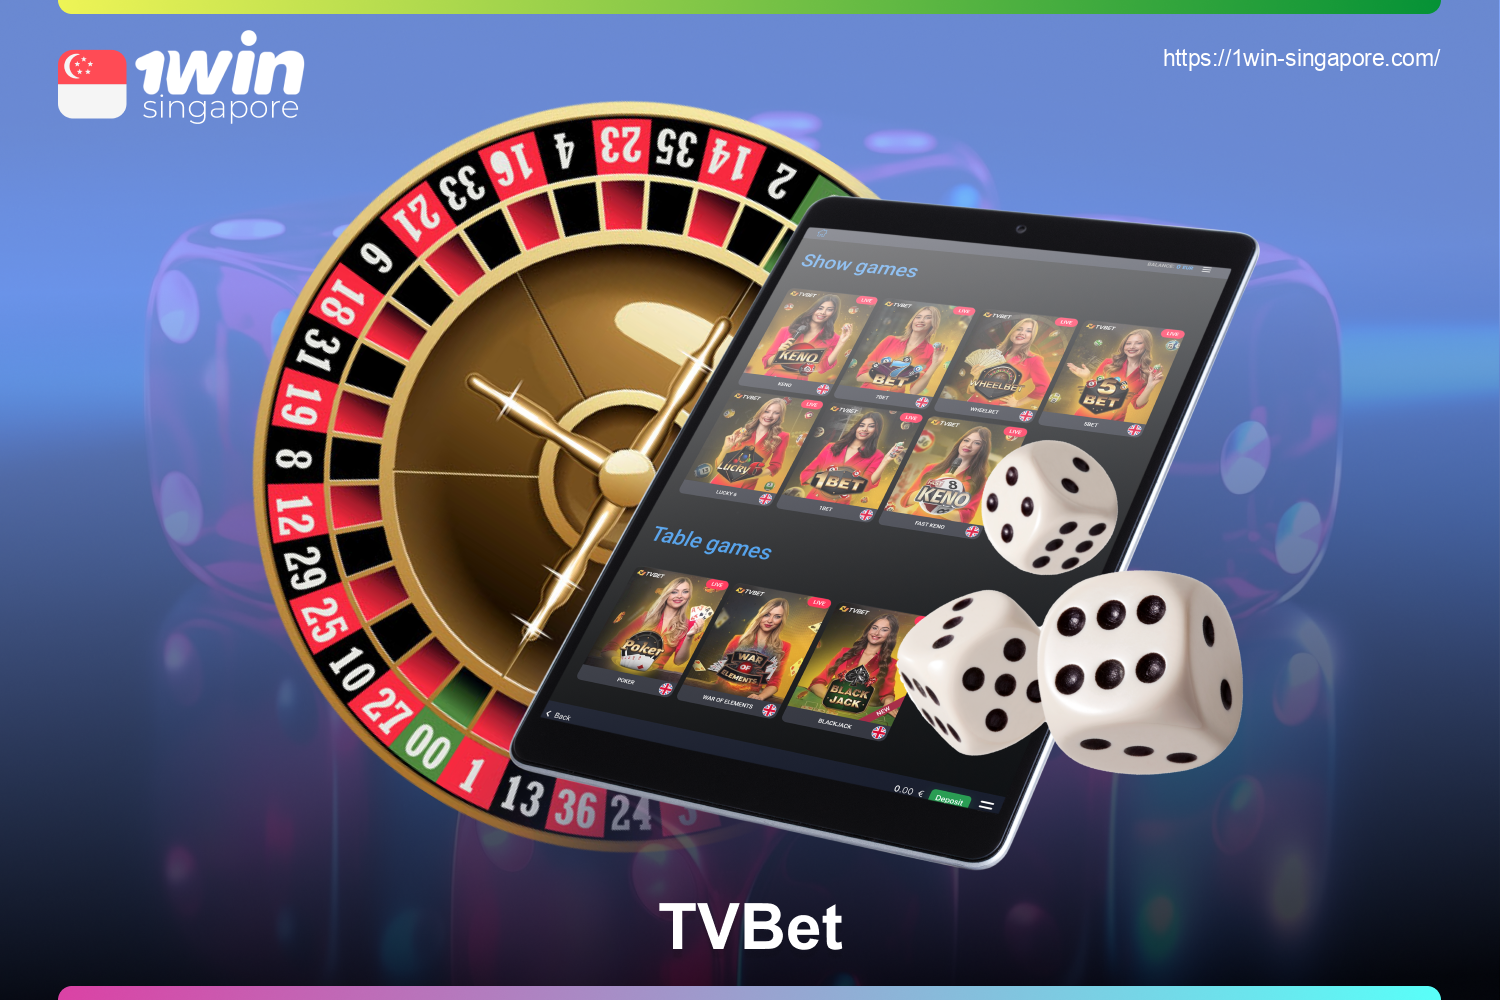 1win Singapore has a section with all the games from renowned live gaming provider TVBET